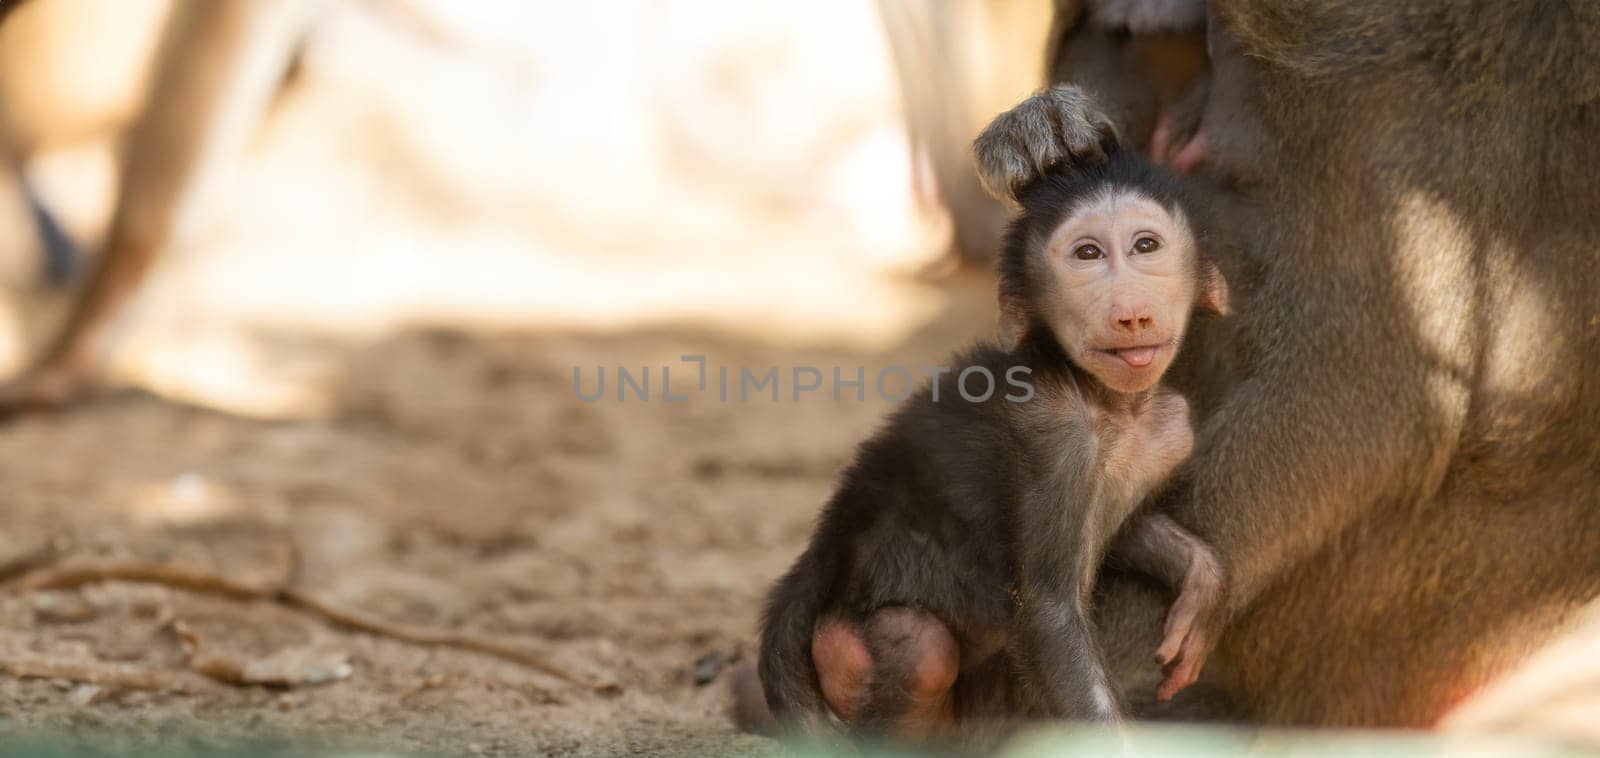 A Cute Baby Monkey Sitting Next to its Wise Adult Companion by Studia72